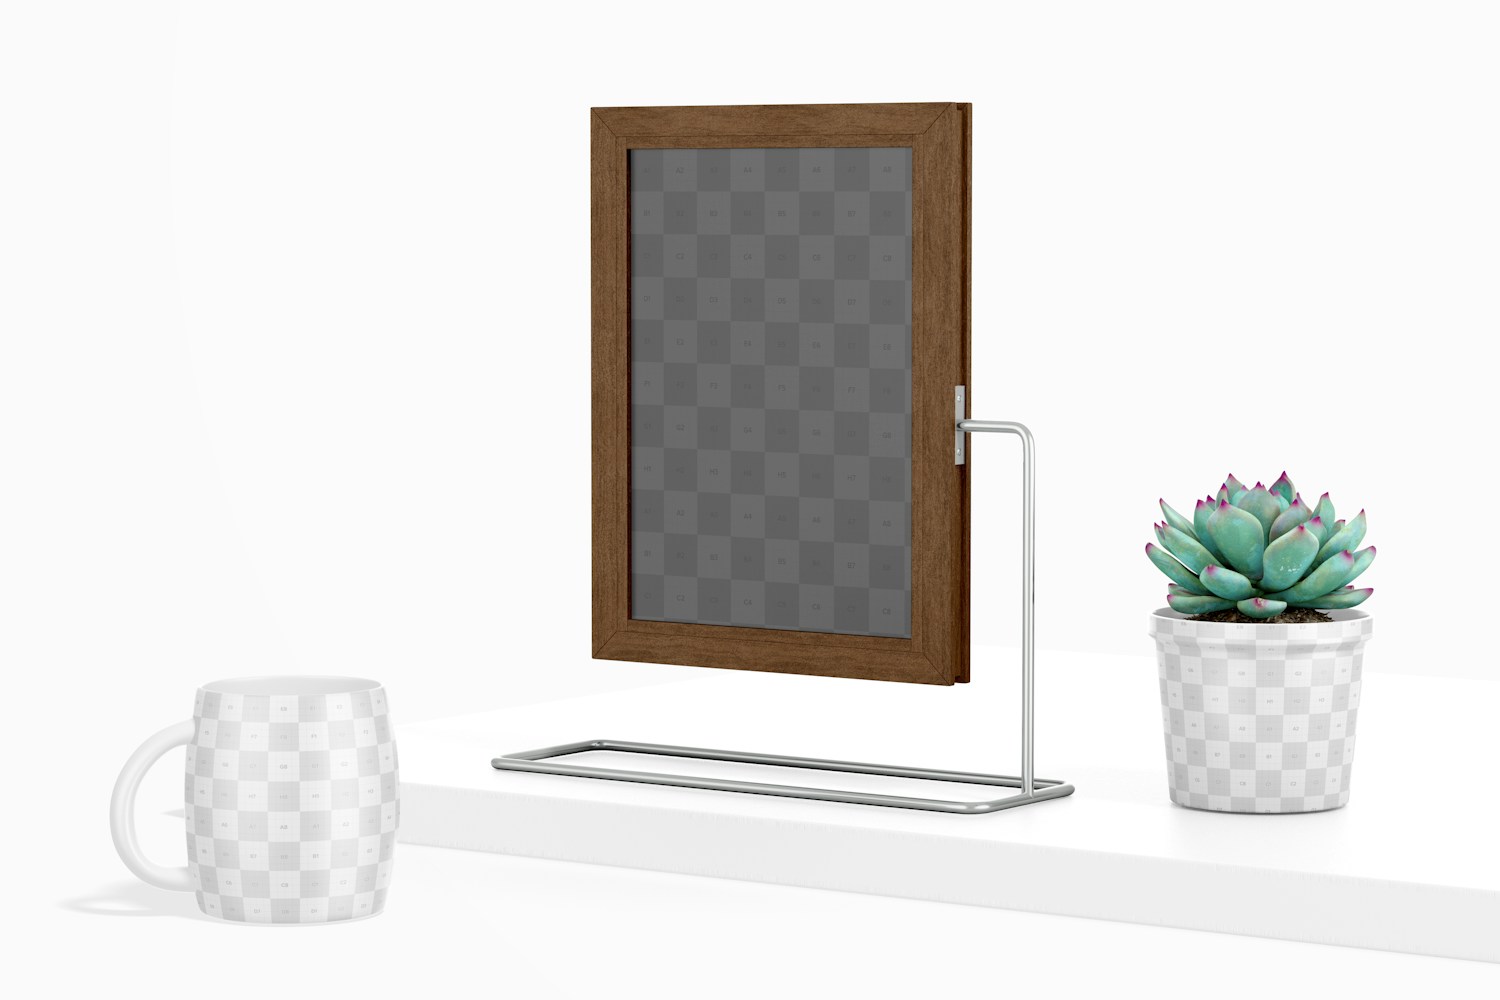 Chalkboard with Metal Stand with Plant Mockup